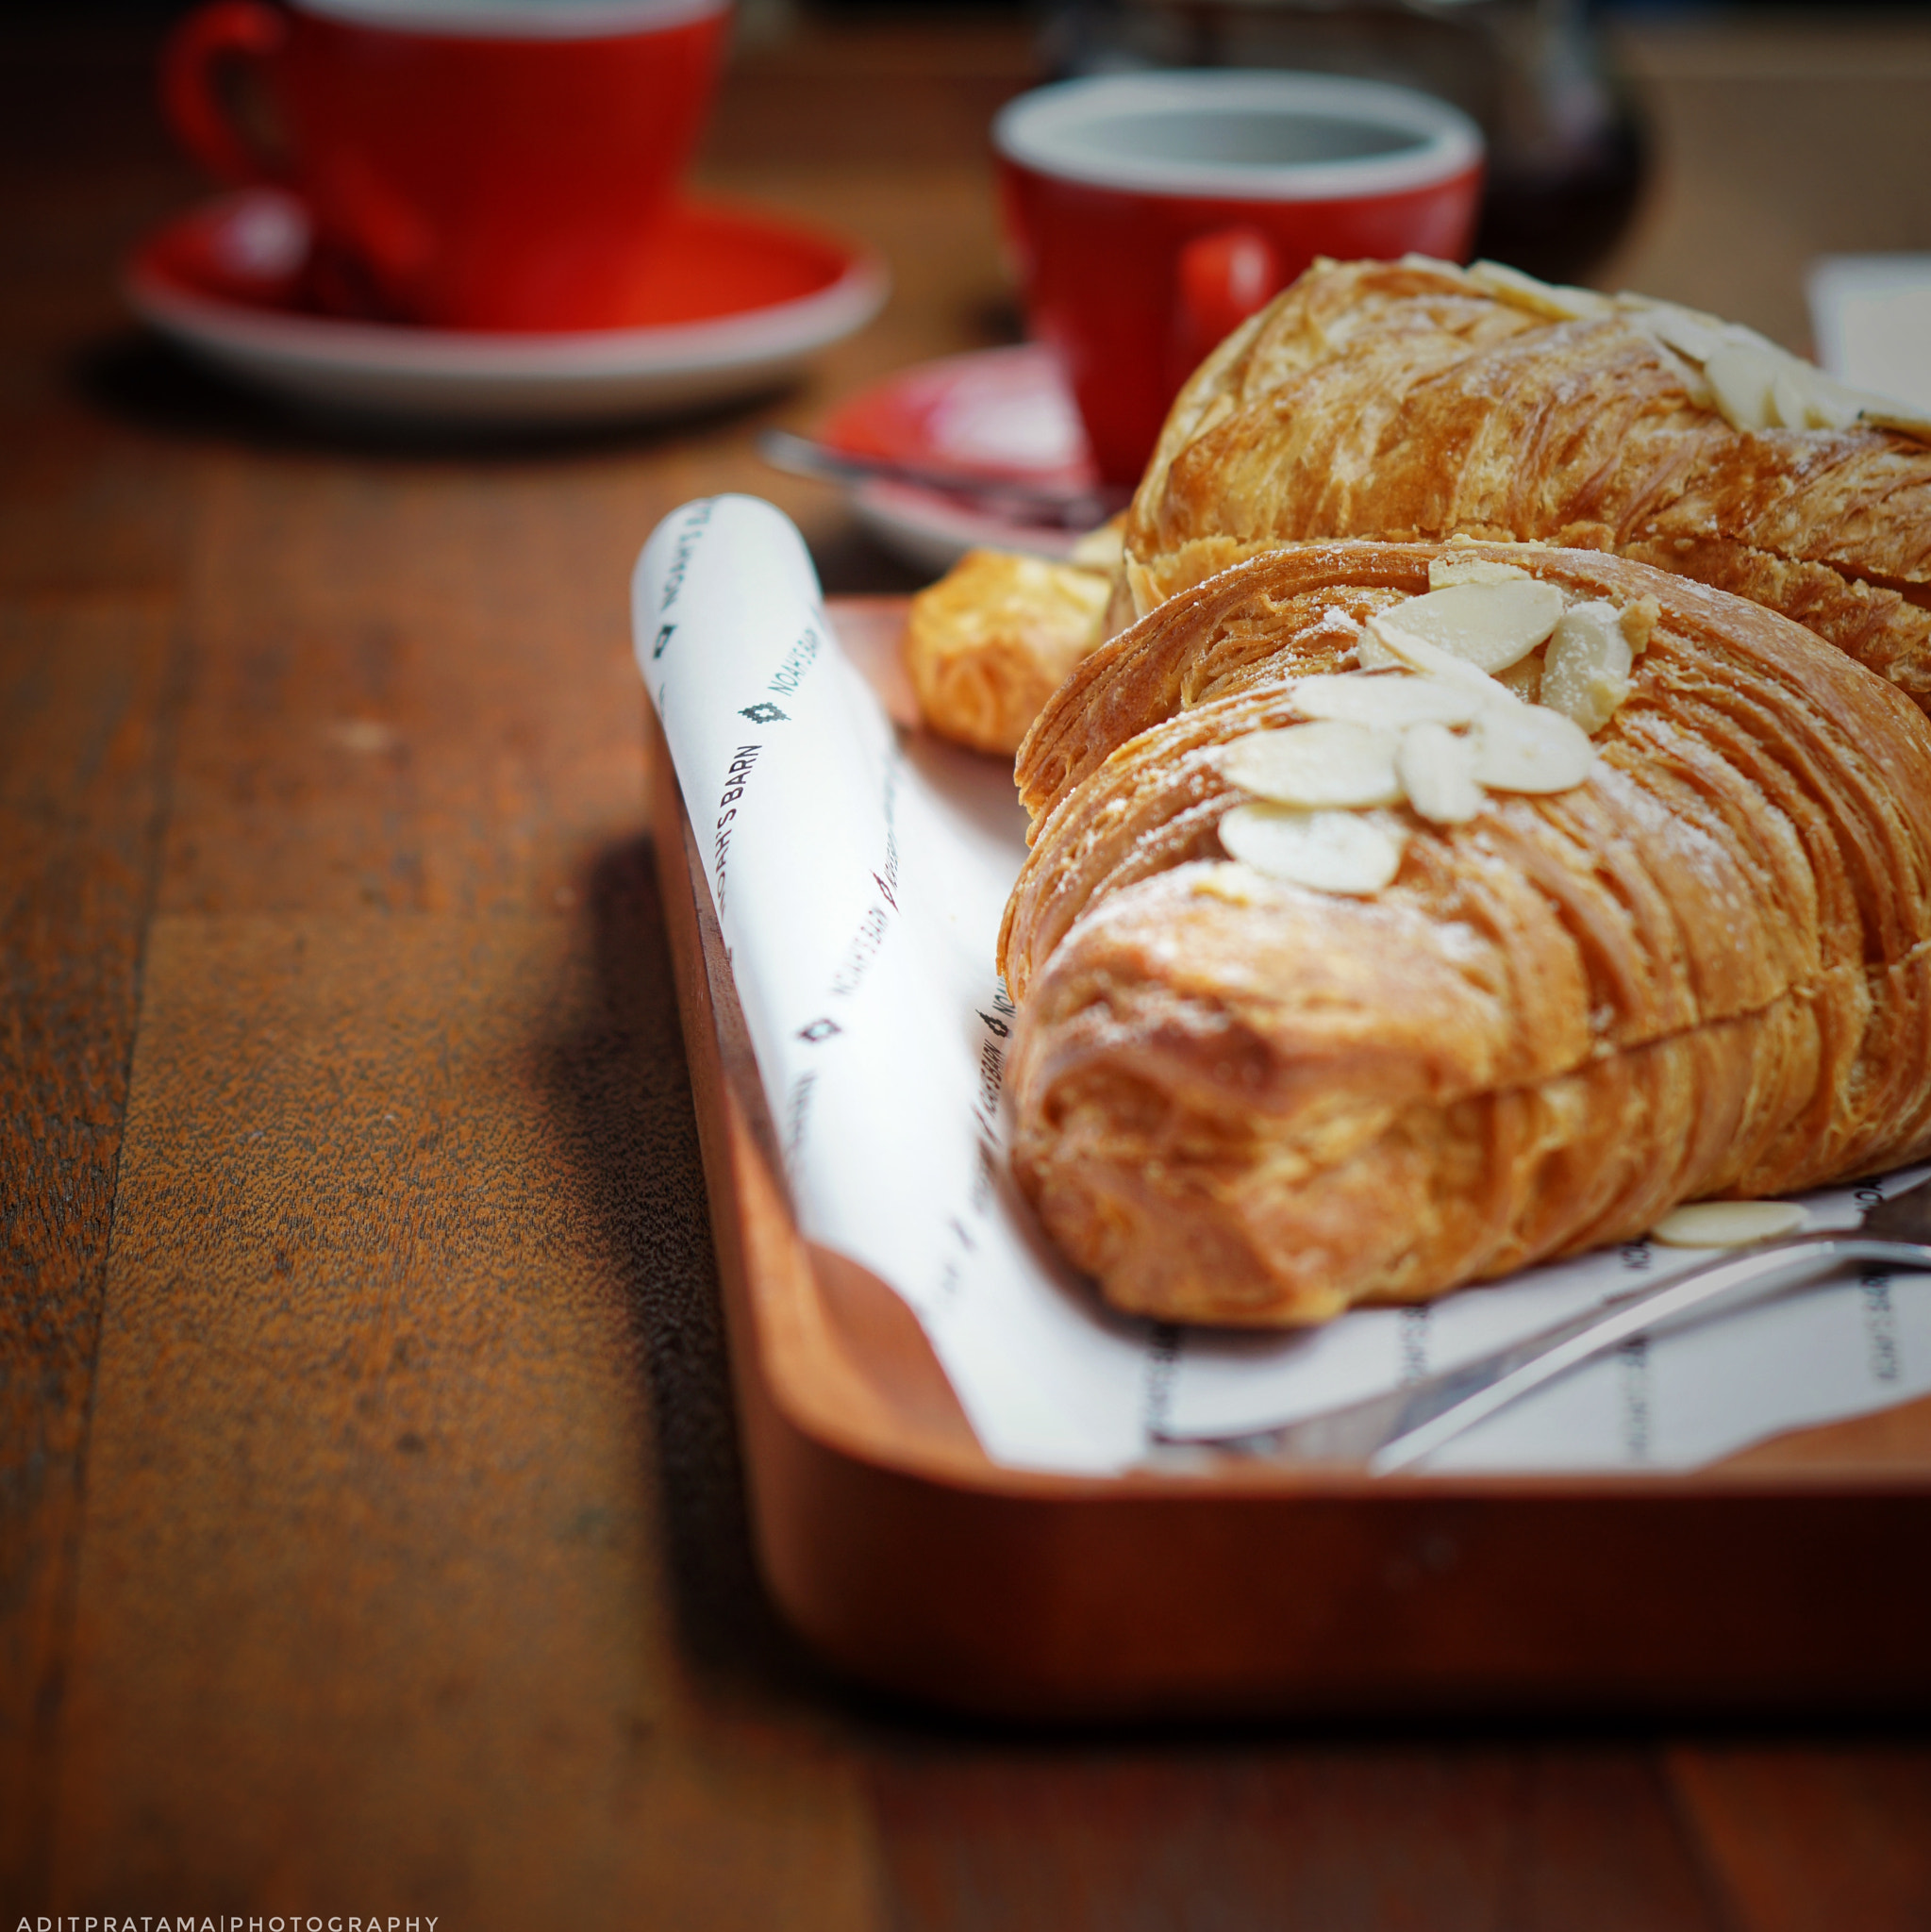 Sony a6000 sample photo. Croissant for breakfast photography